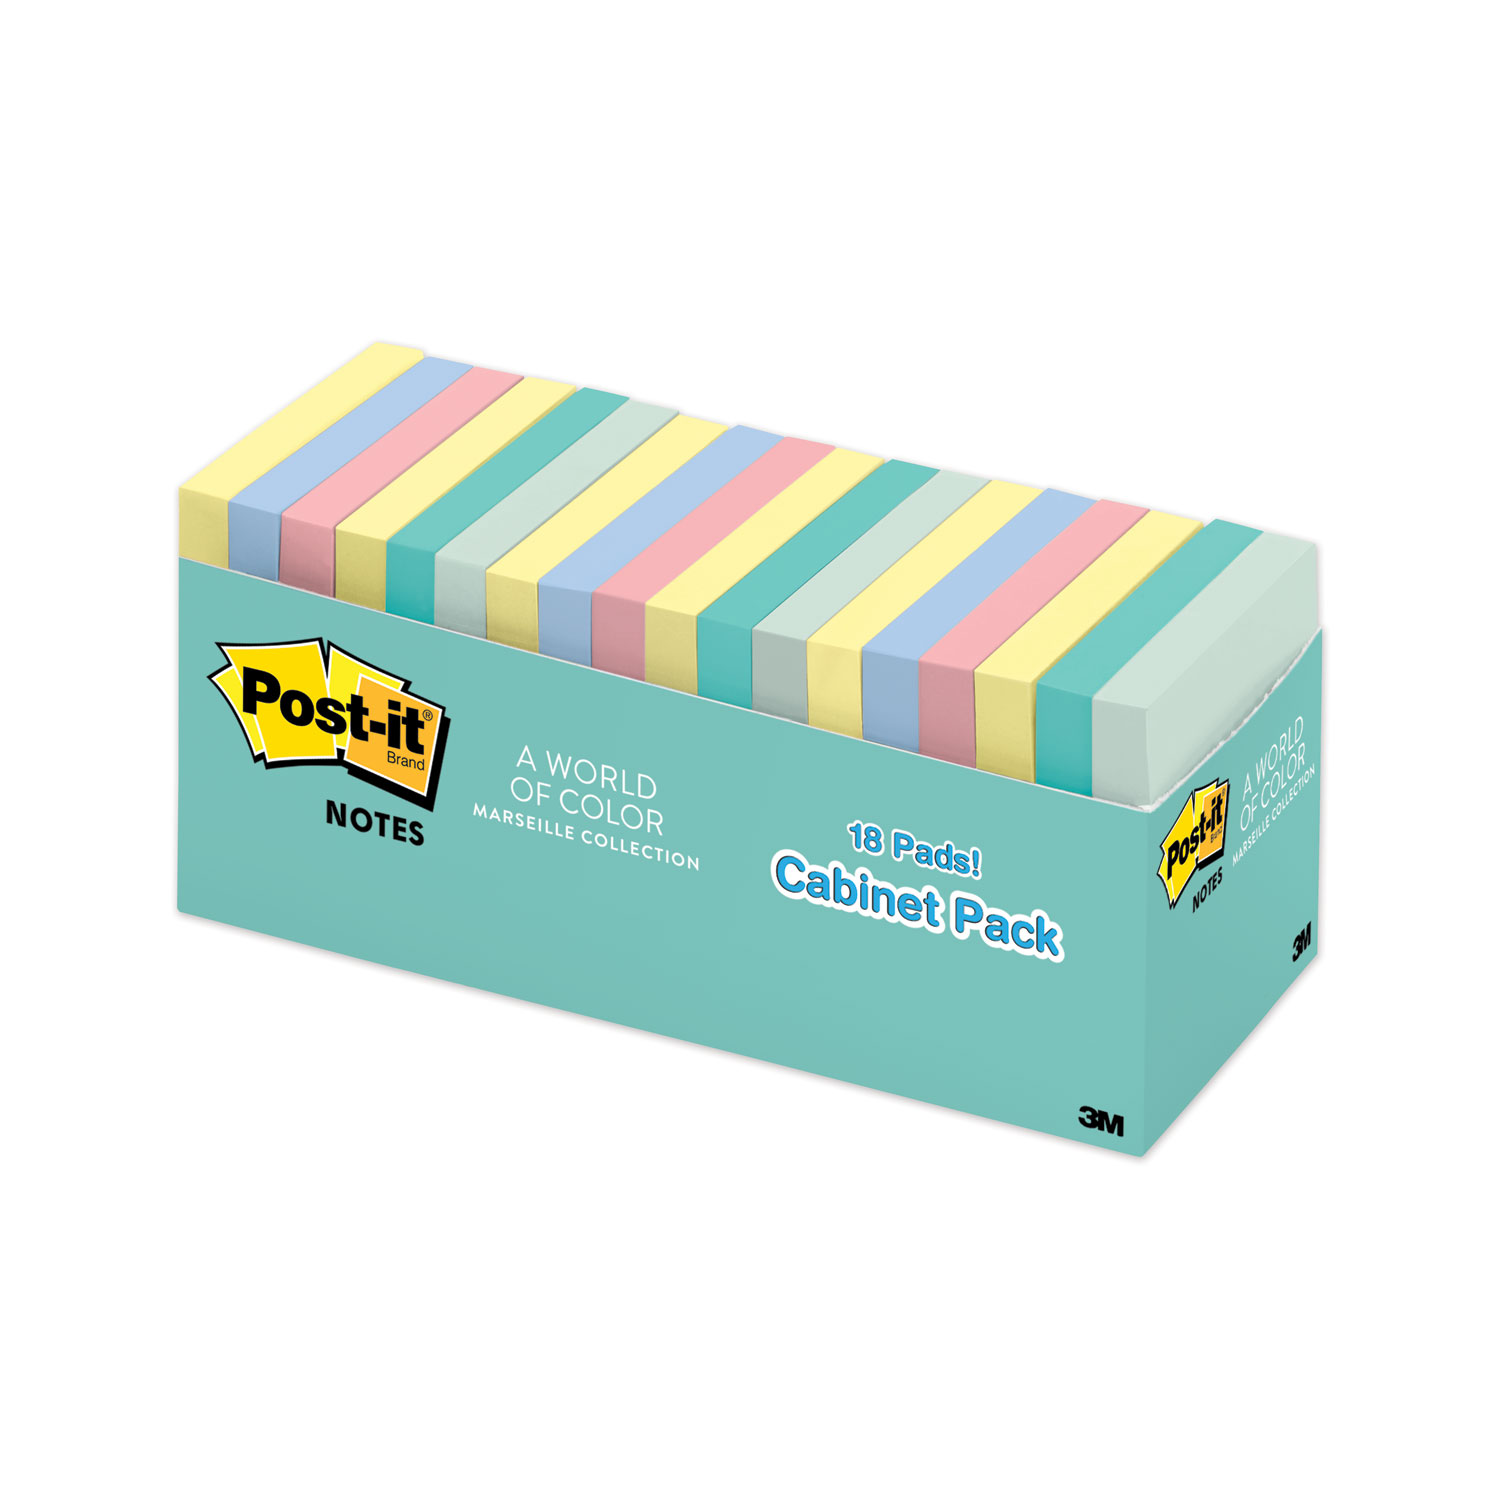 Post-it® Notes Original Pads in Marseille Colors, Cabinet Pack, 3 x 3, 100 Sheets/Pad, 18 Pads/Pack